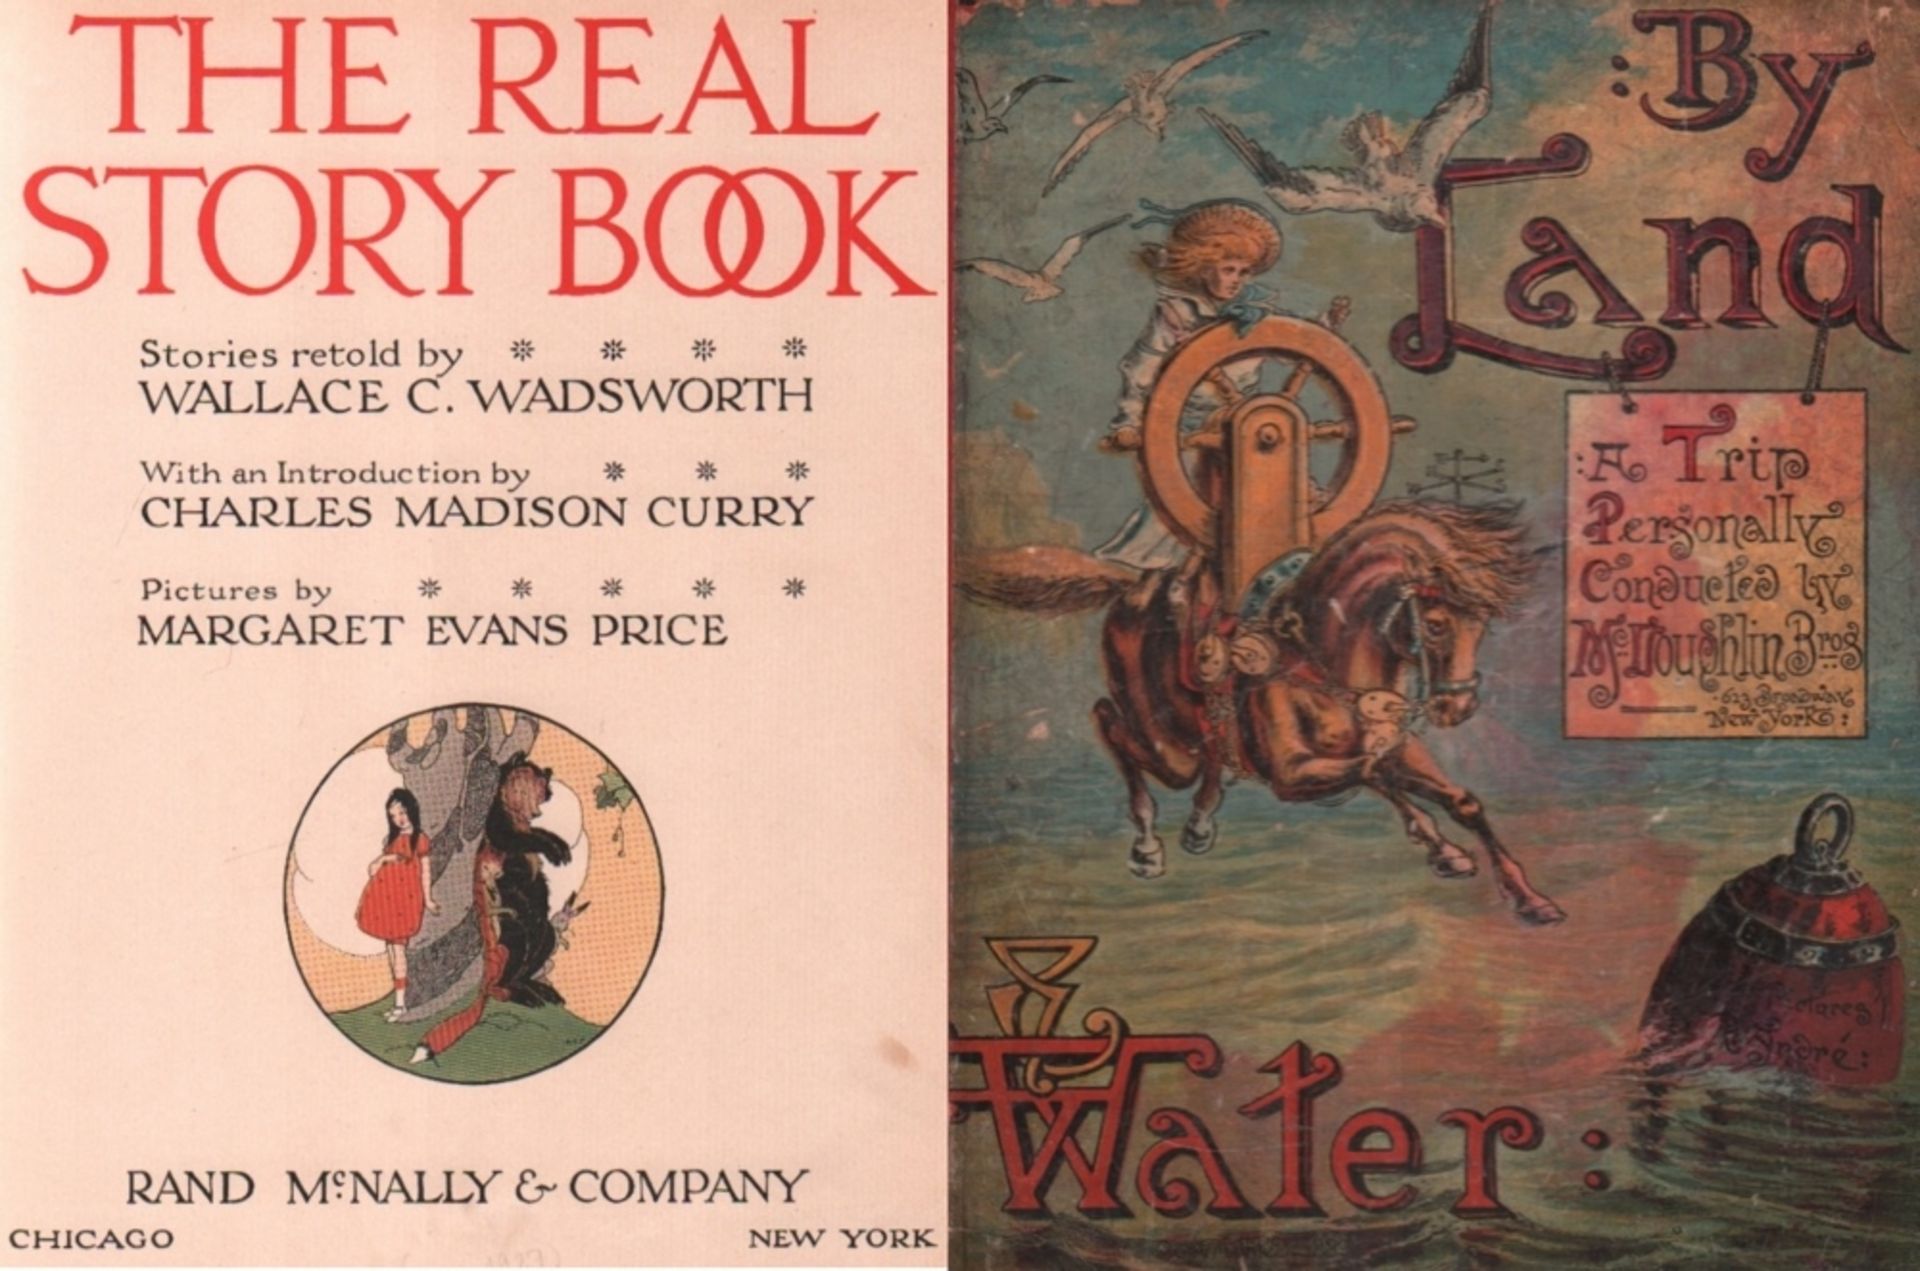 Kinderbuch. Wadsworth, Wallace C. The Real Story Books. With an Introduction by Charles Madison